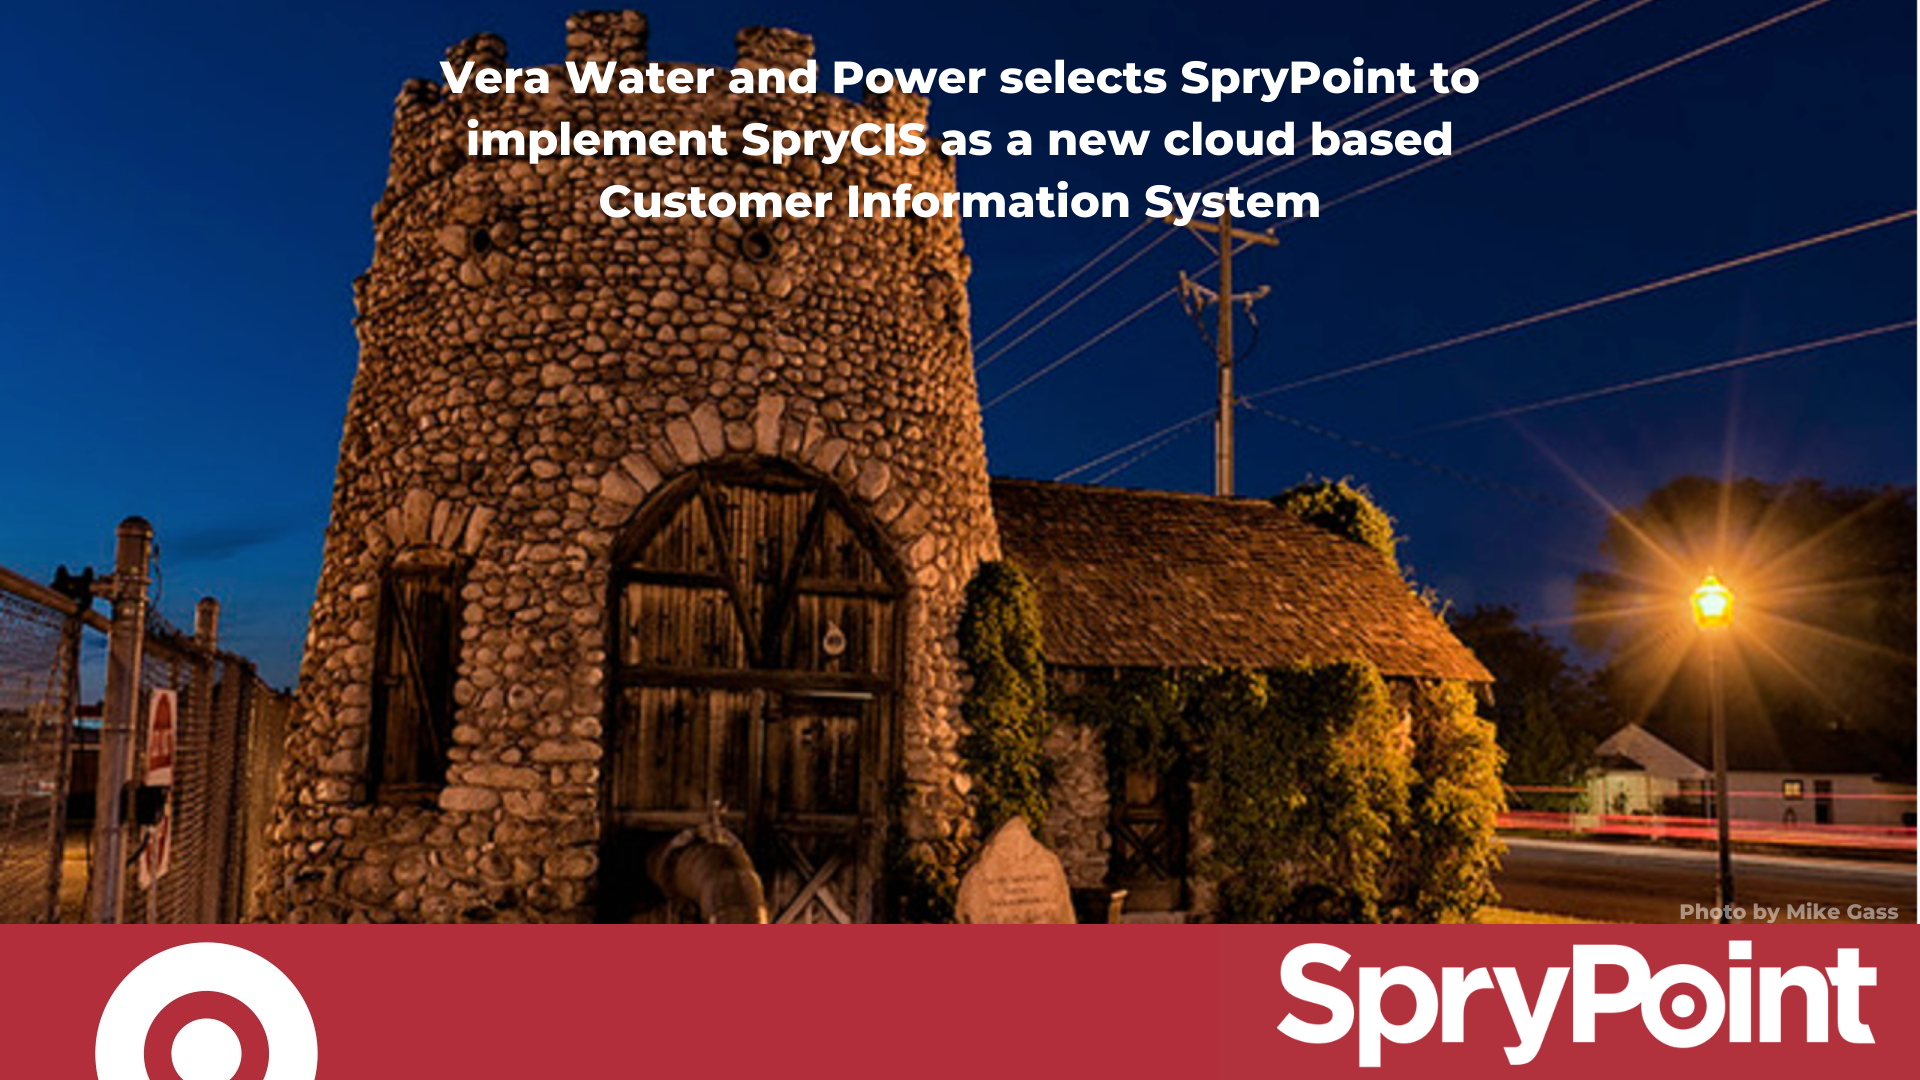 Vera Water and Power selects SpryPoint to implement SpryCIS as a new cloud based Customer Information System 